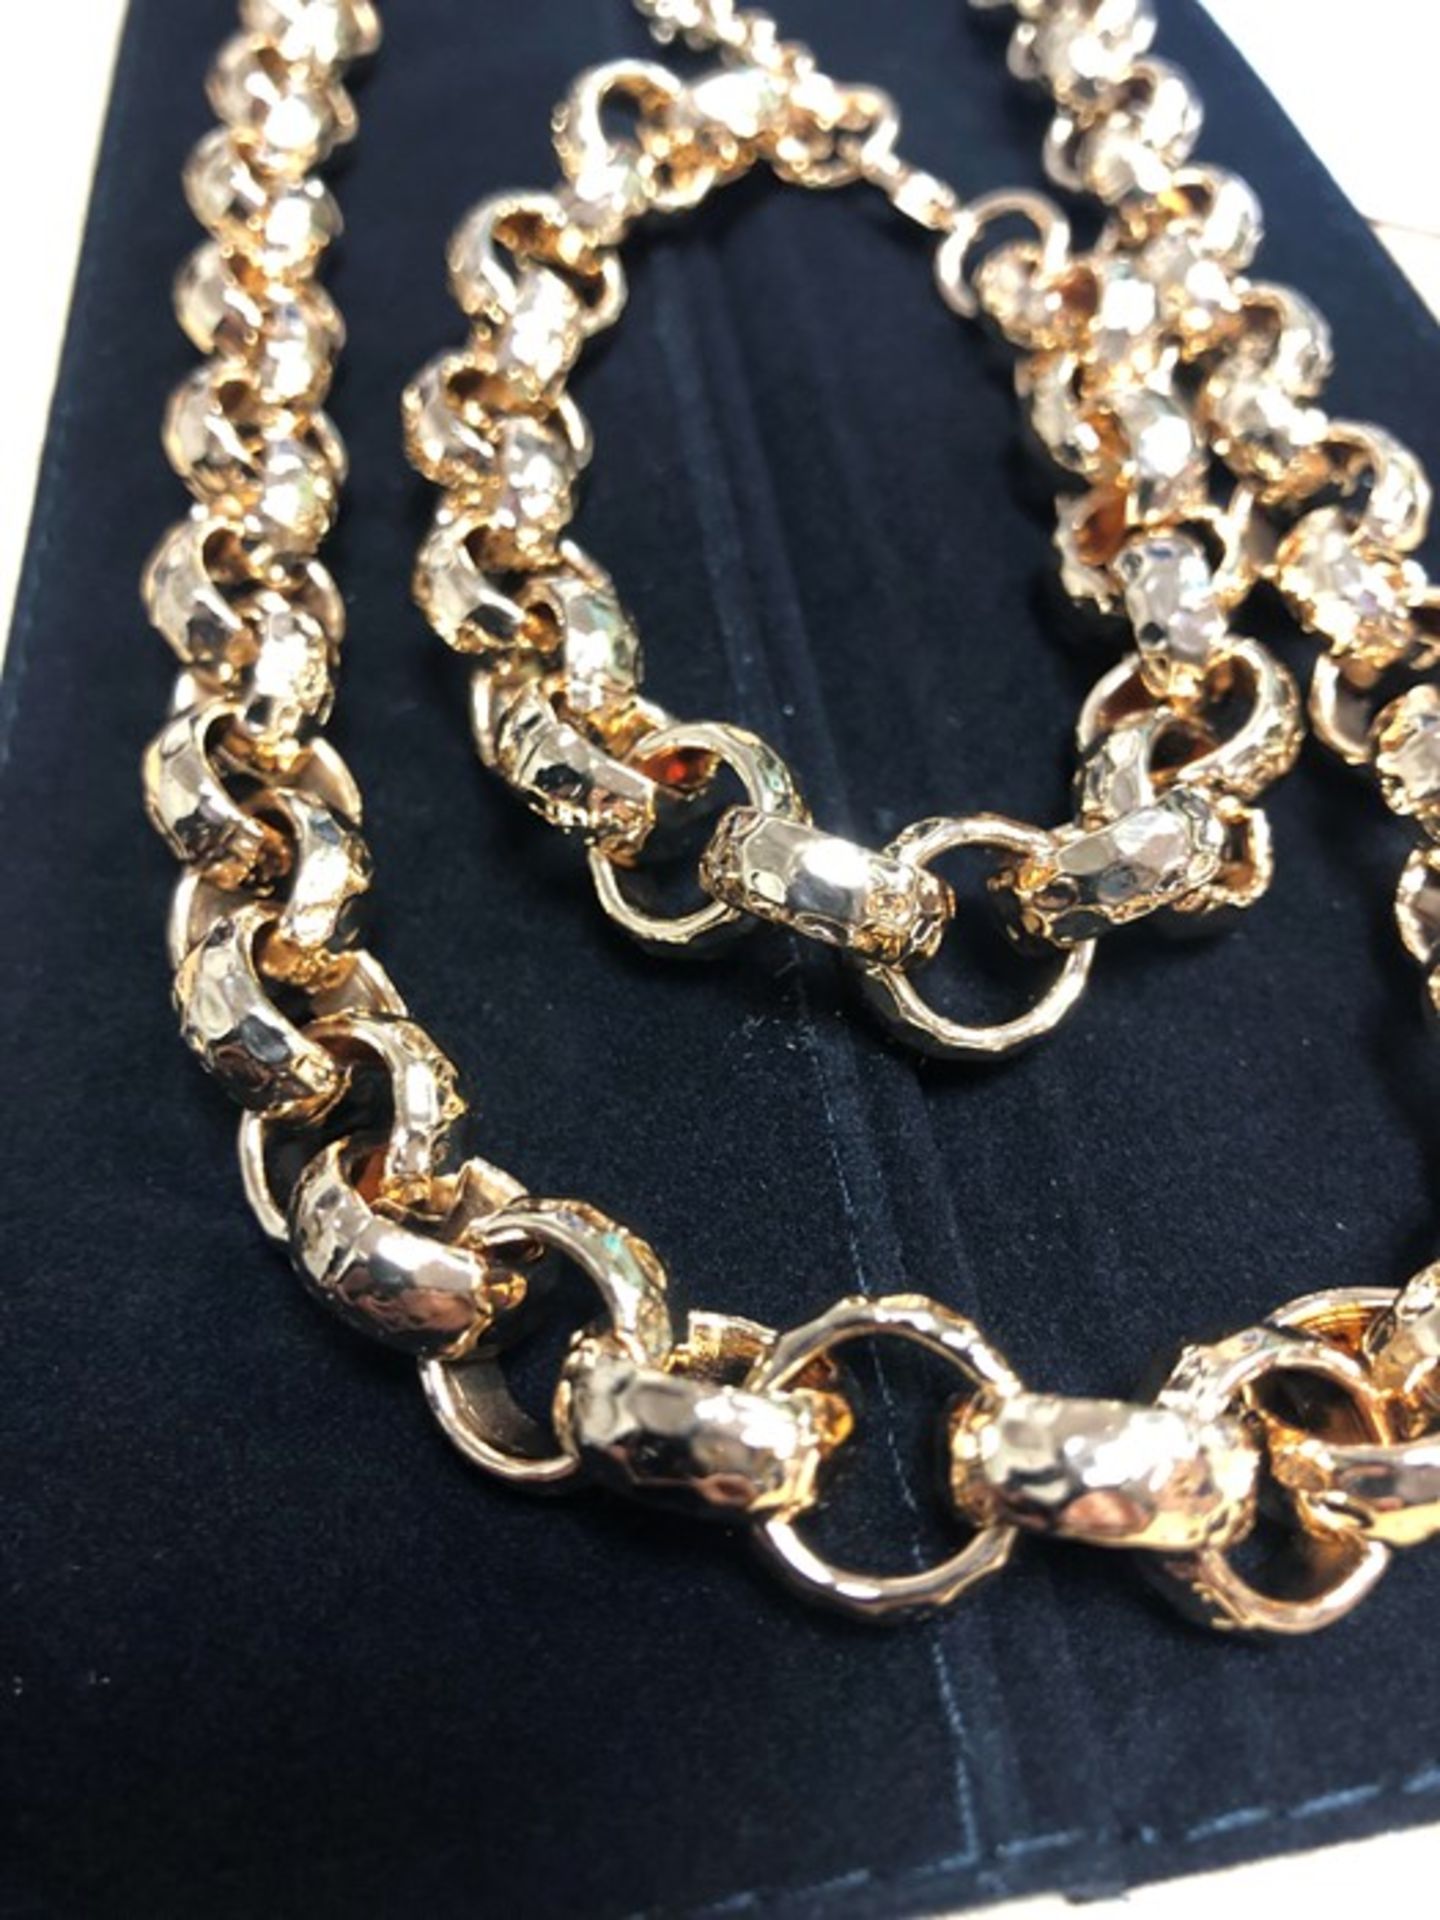 Gold Filled Diamond cut Belcher Chain Necklace and Bracelet set, new, Necklace is 24" and weighs 160 - Image 4 of 4